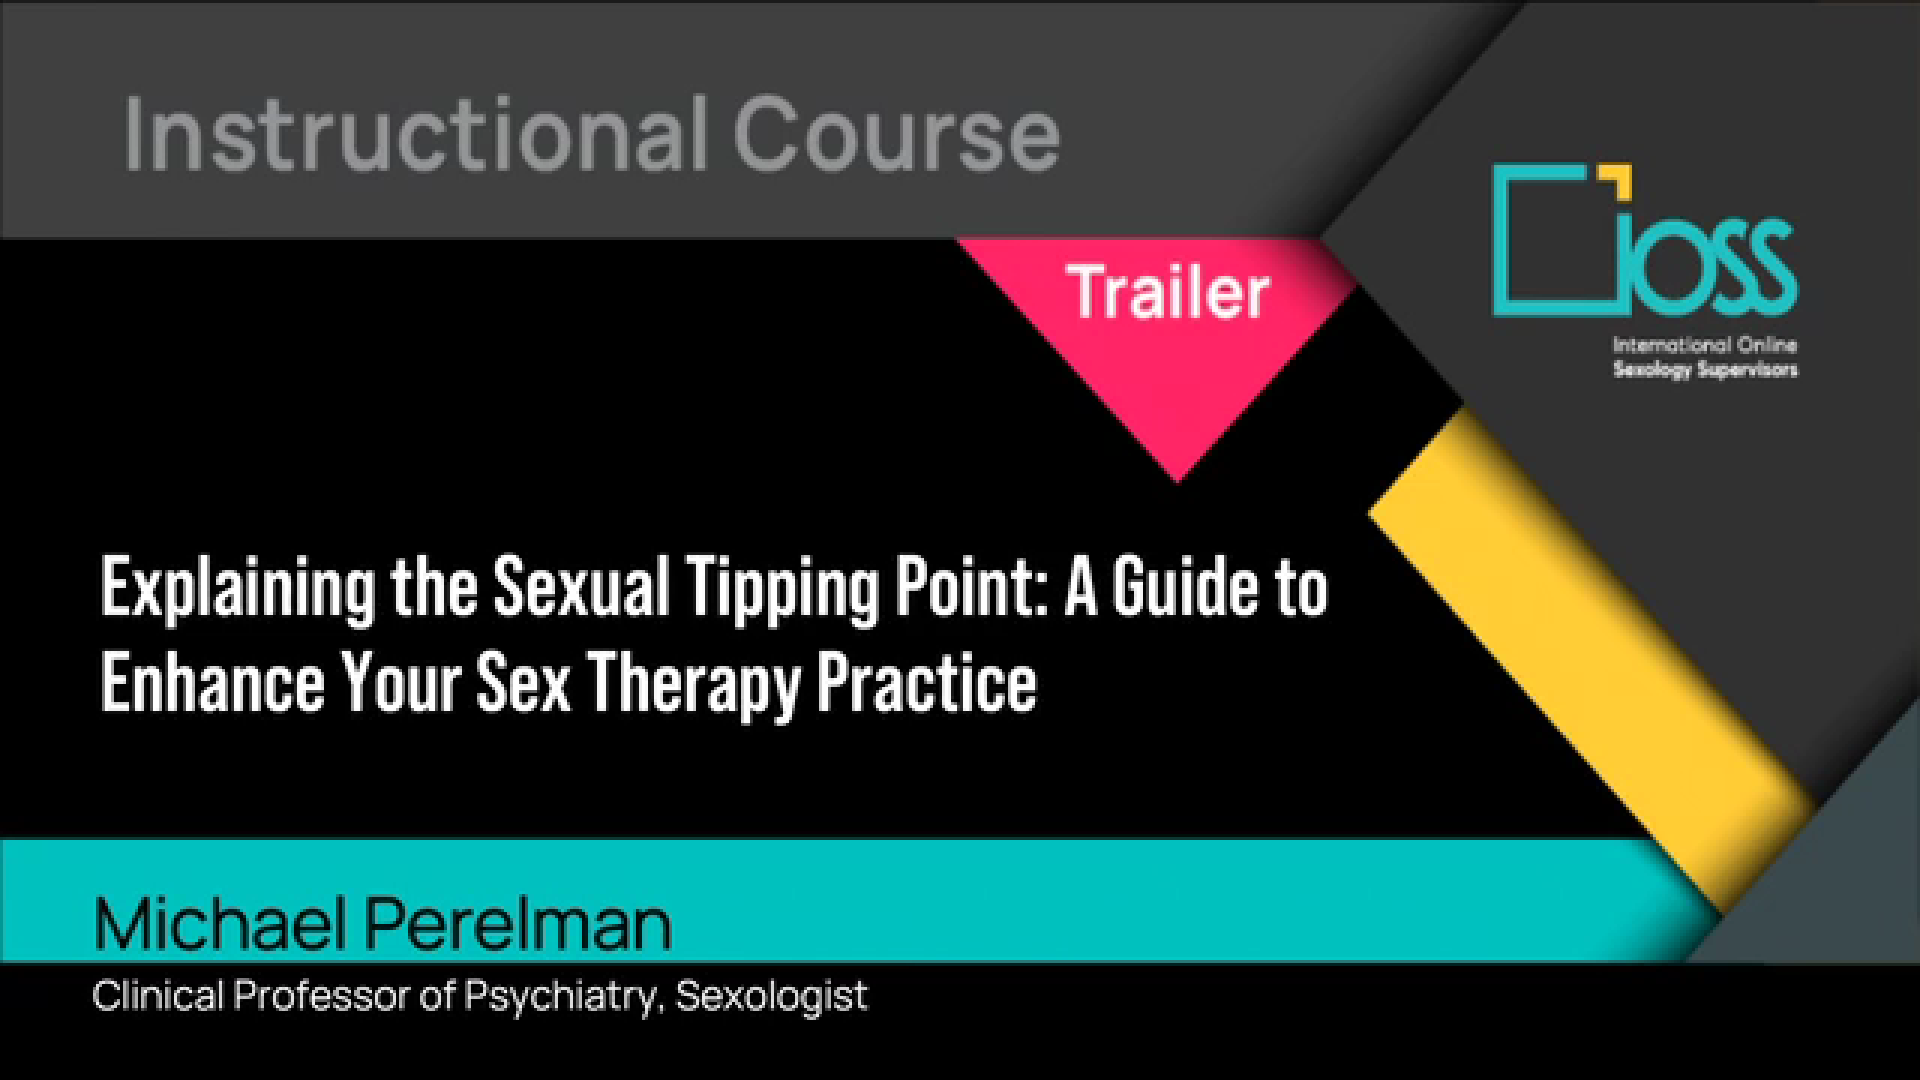 Trailer Explaining the Sexual Tipping Point: A Guide to Enhance Your Sex Therapy Practice (Part 1 & 2)